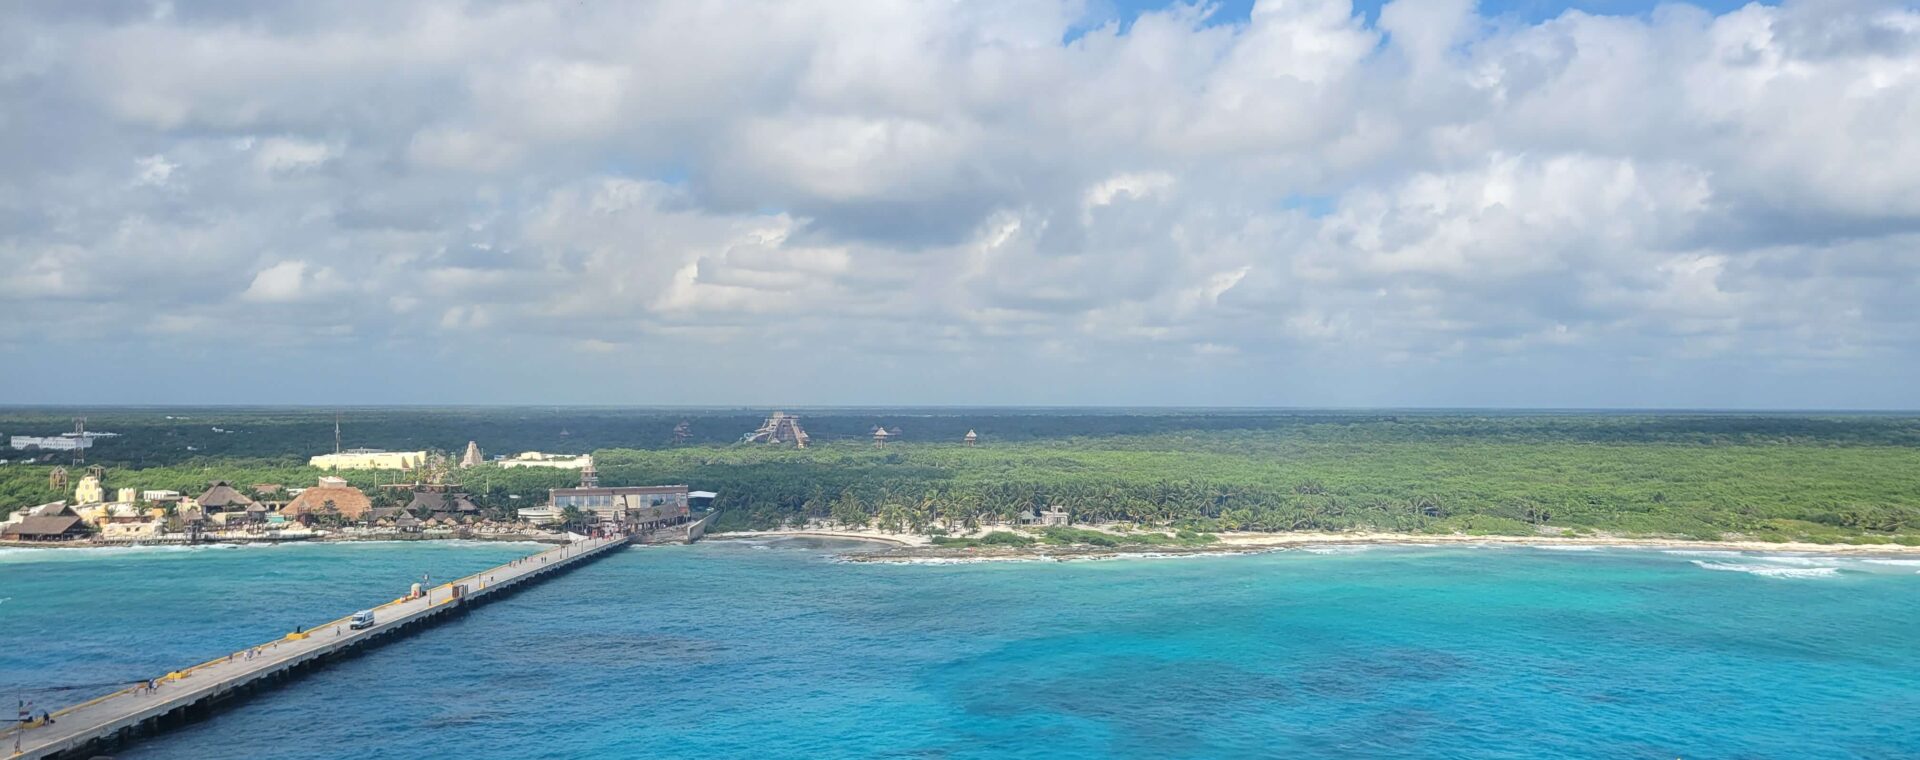 Use this review for a great budget friendly shore excursion in Costa Maya.